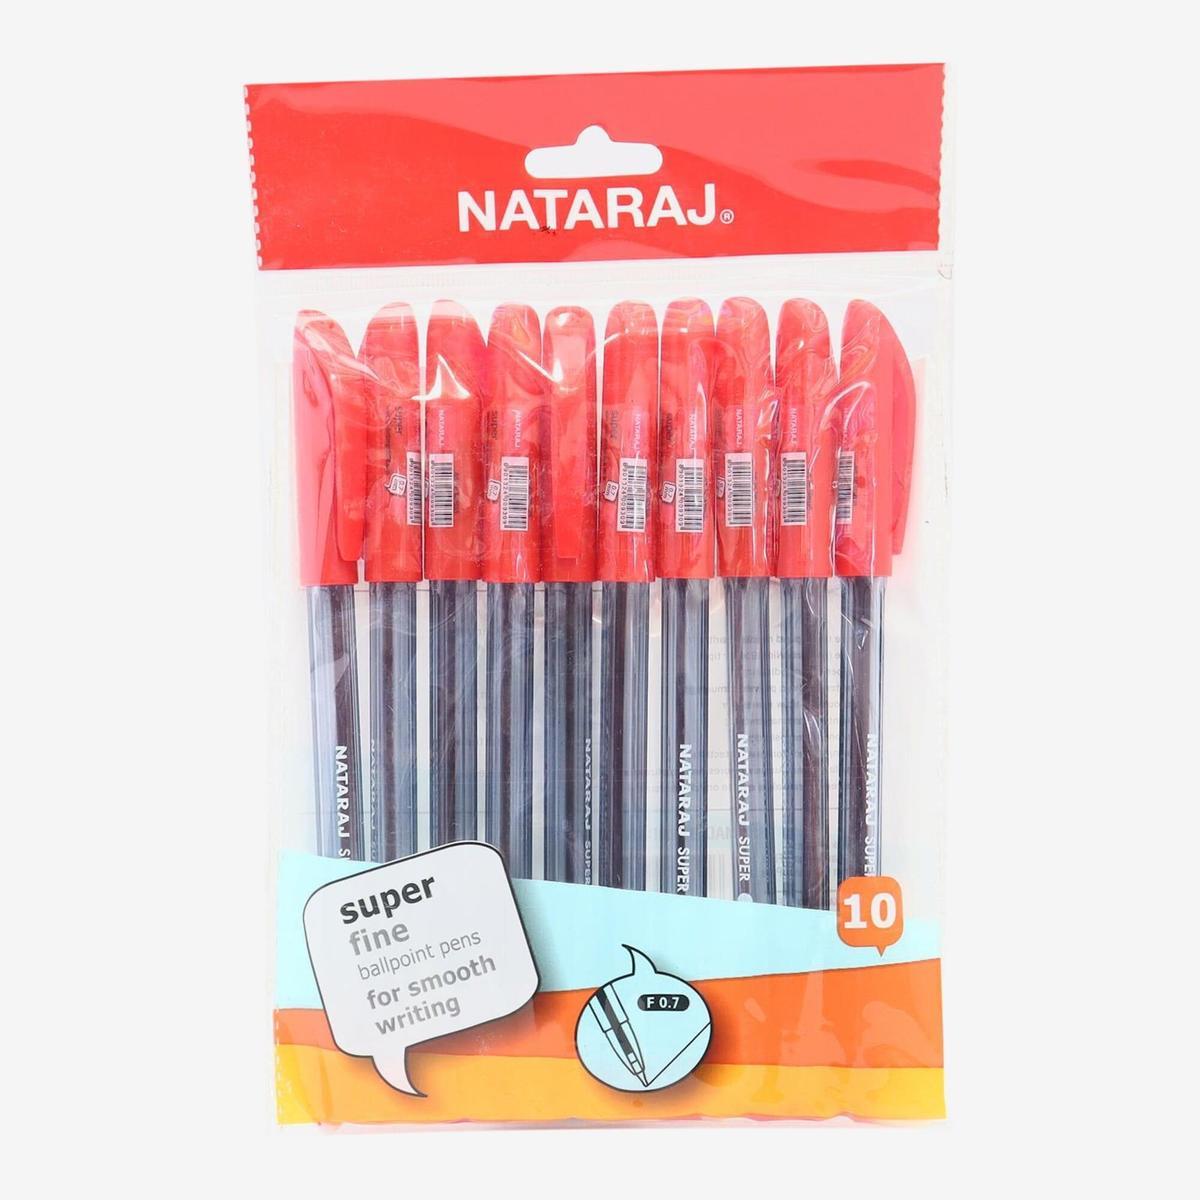 nataraj super fine ballpoint pens for smooth writing red ink